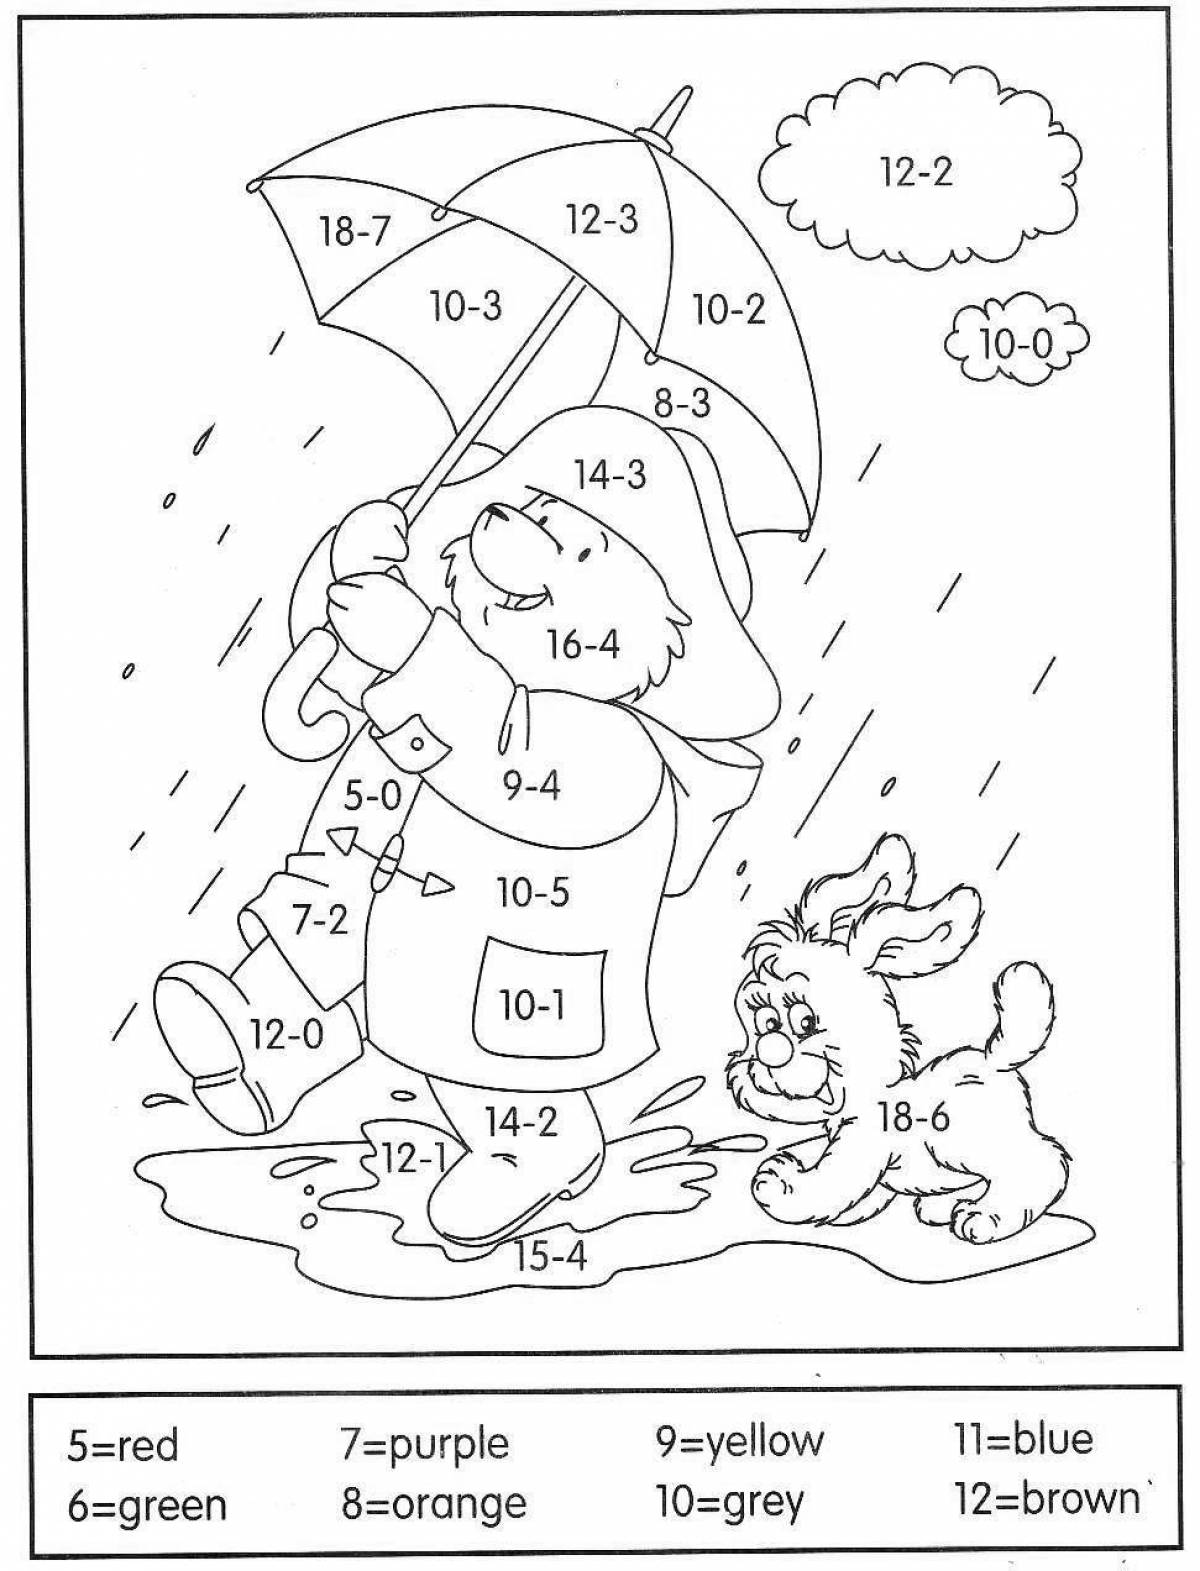 Coloring book from count to 10 for preschoolers